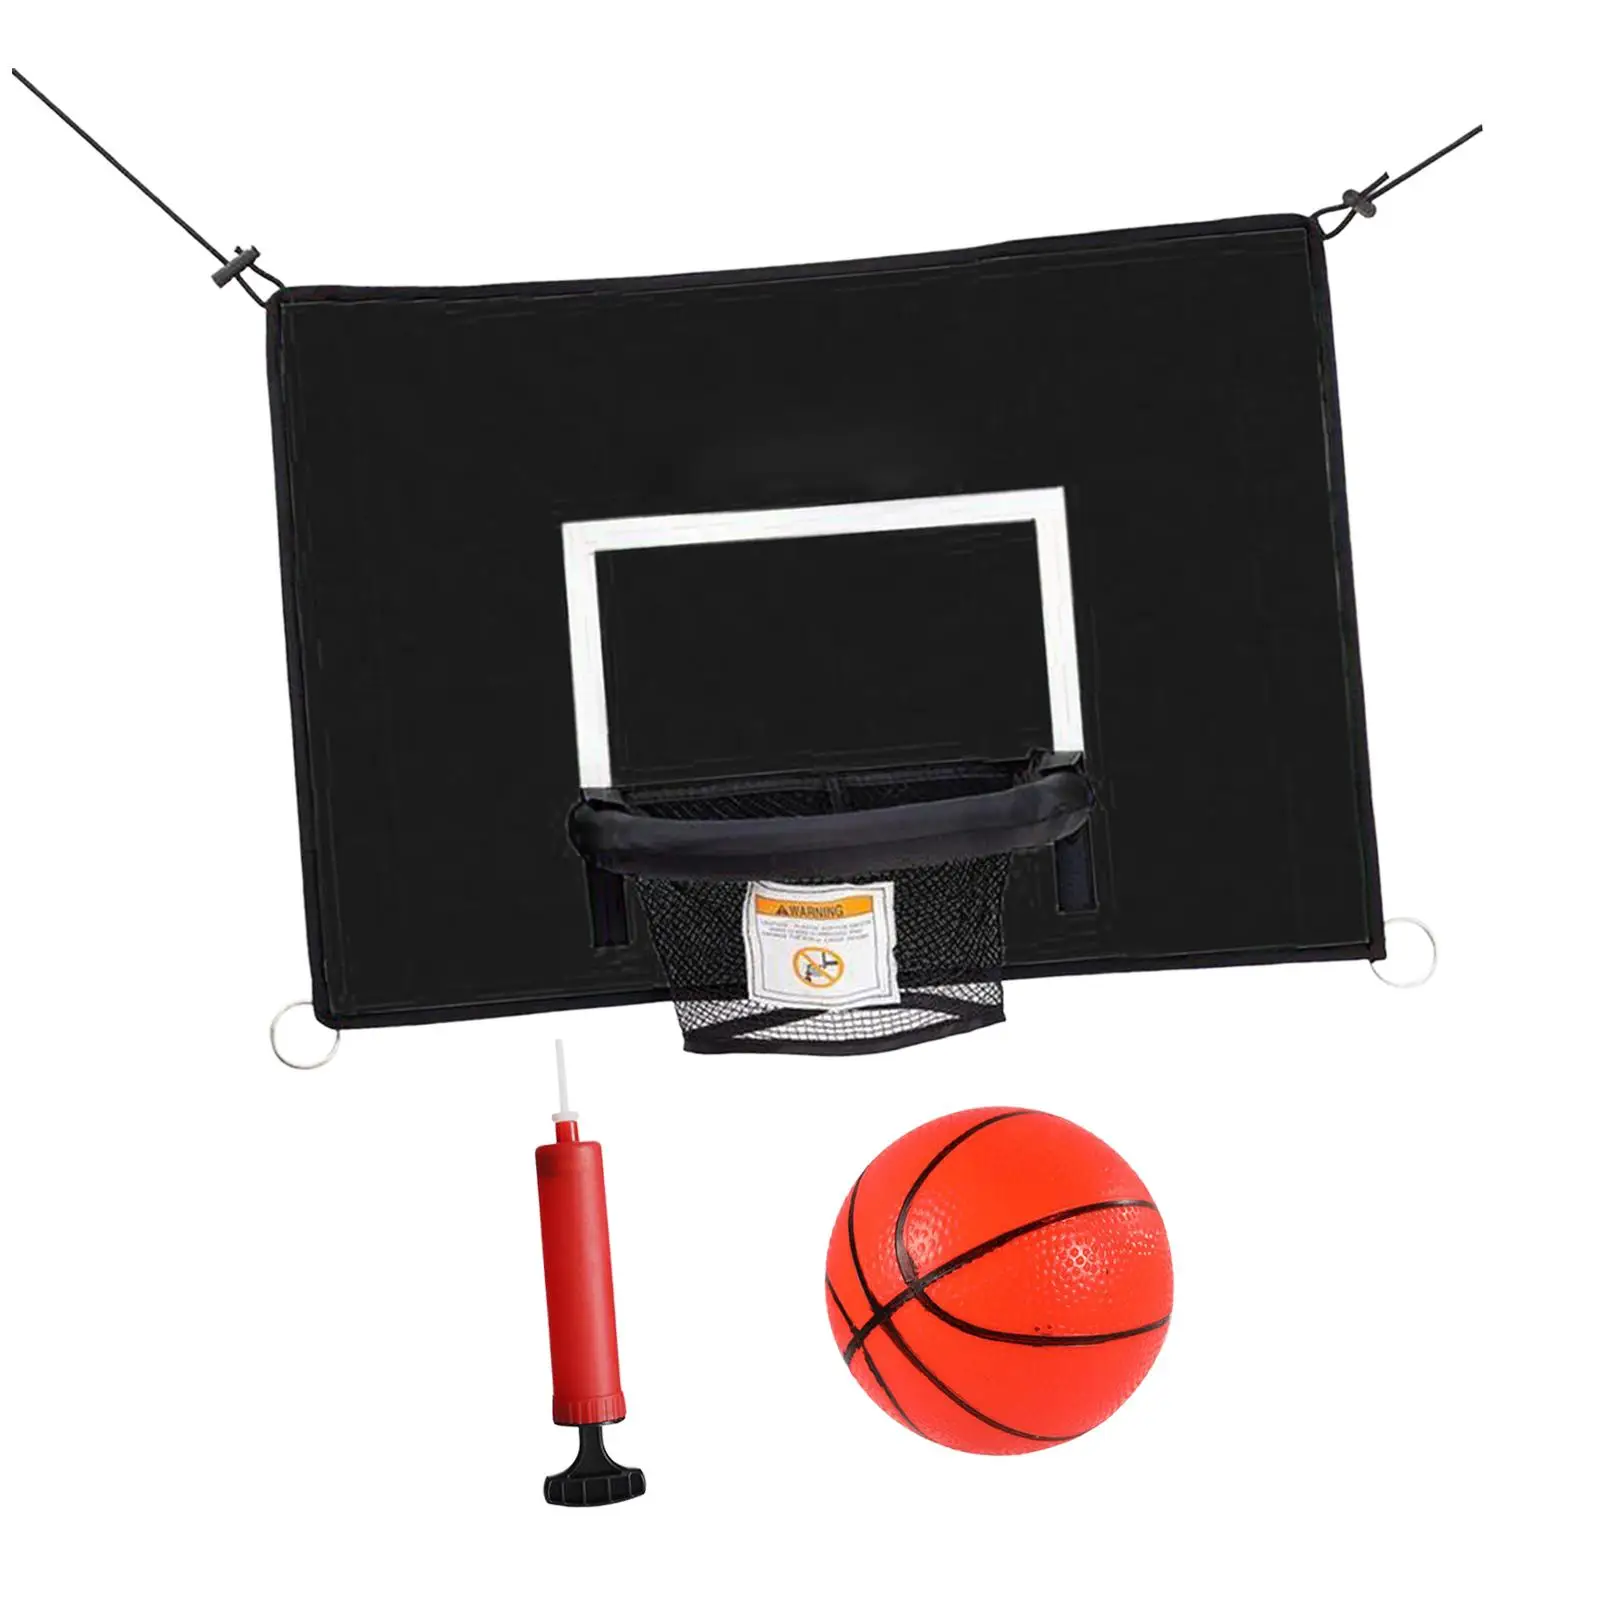 Basketball Hoop for Trampoline with Pump and Mini Ball Breakaway Rim for Safety Dunking Trampoline Attachment Accessory